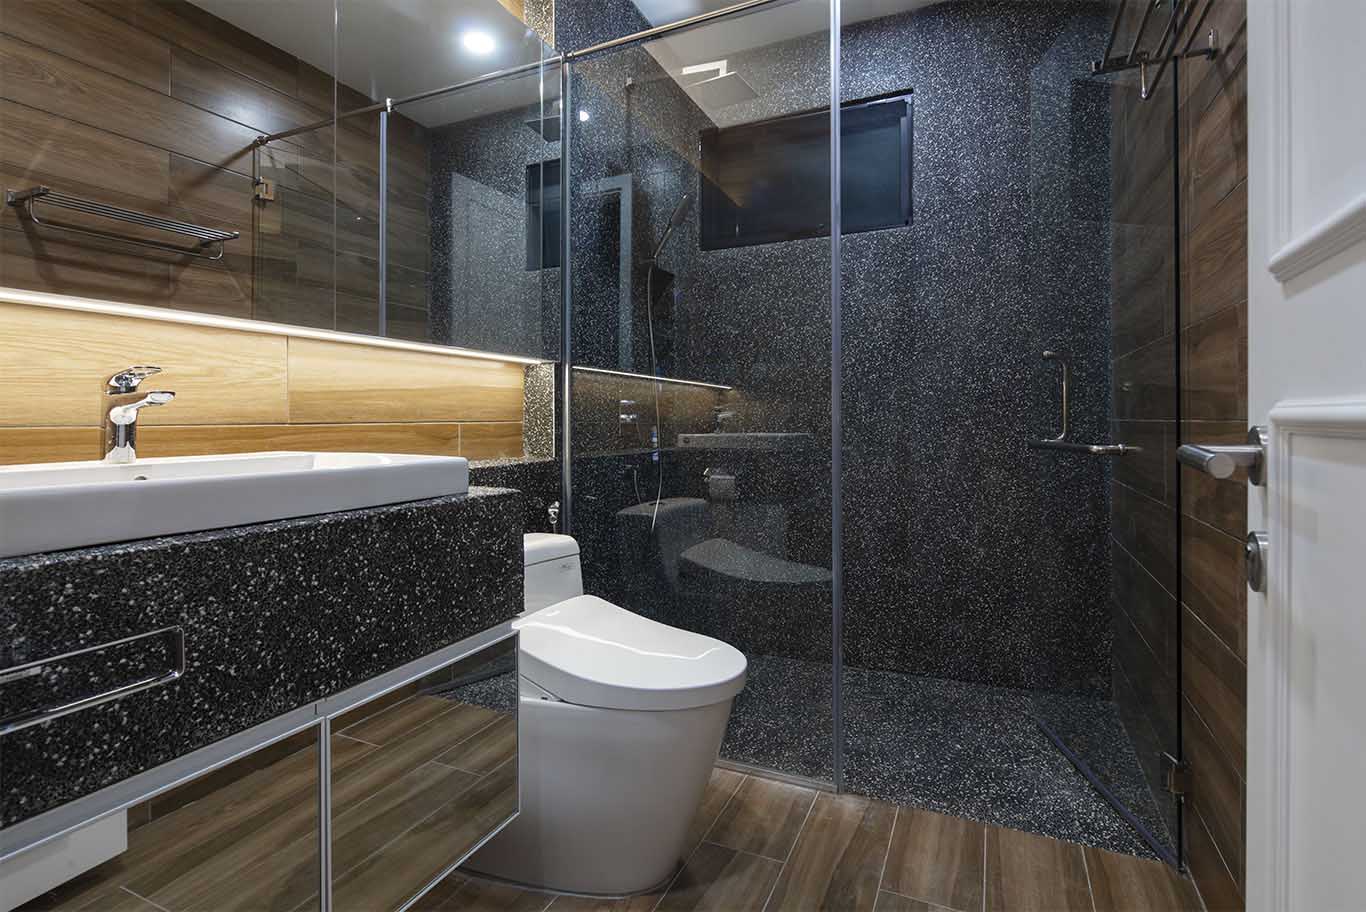 MIEUX The White Royale modern luxurious toilet with dark marble and glass shower door mieux interior design